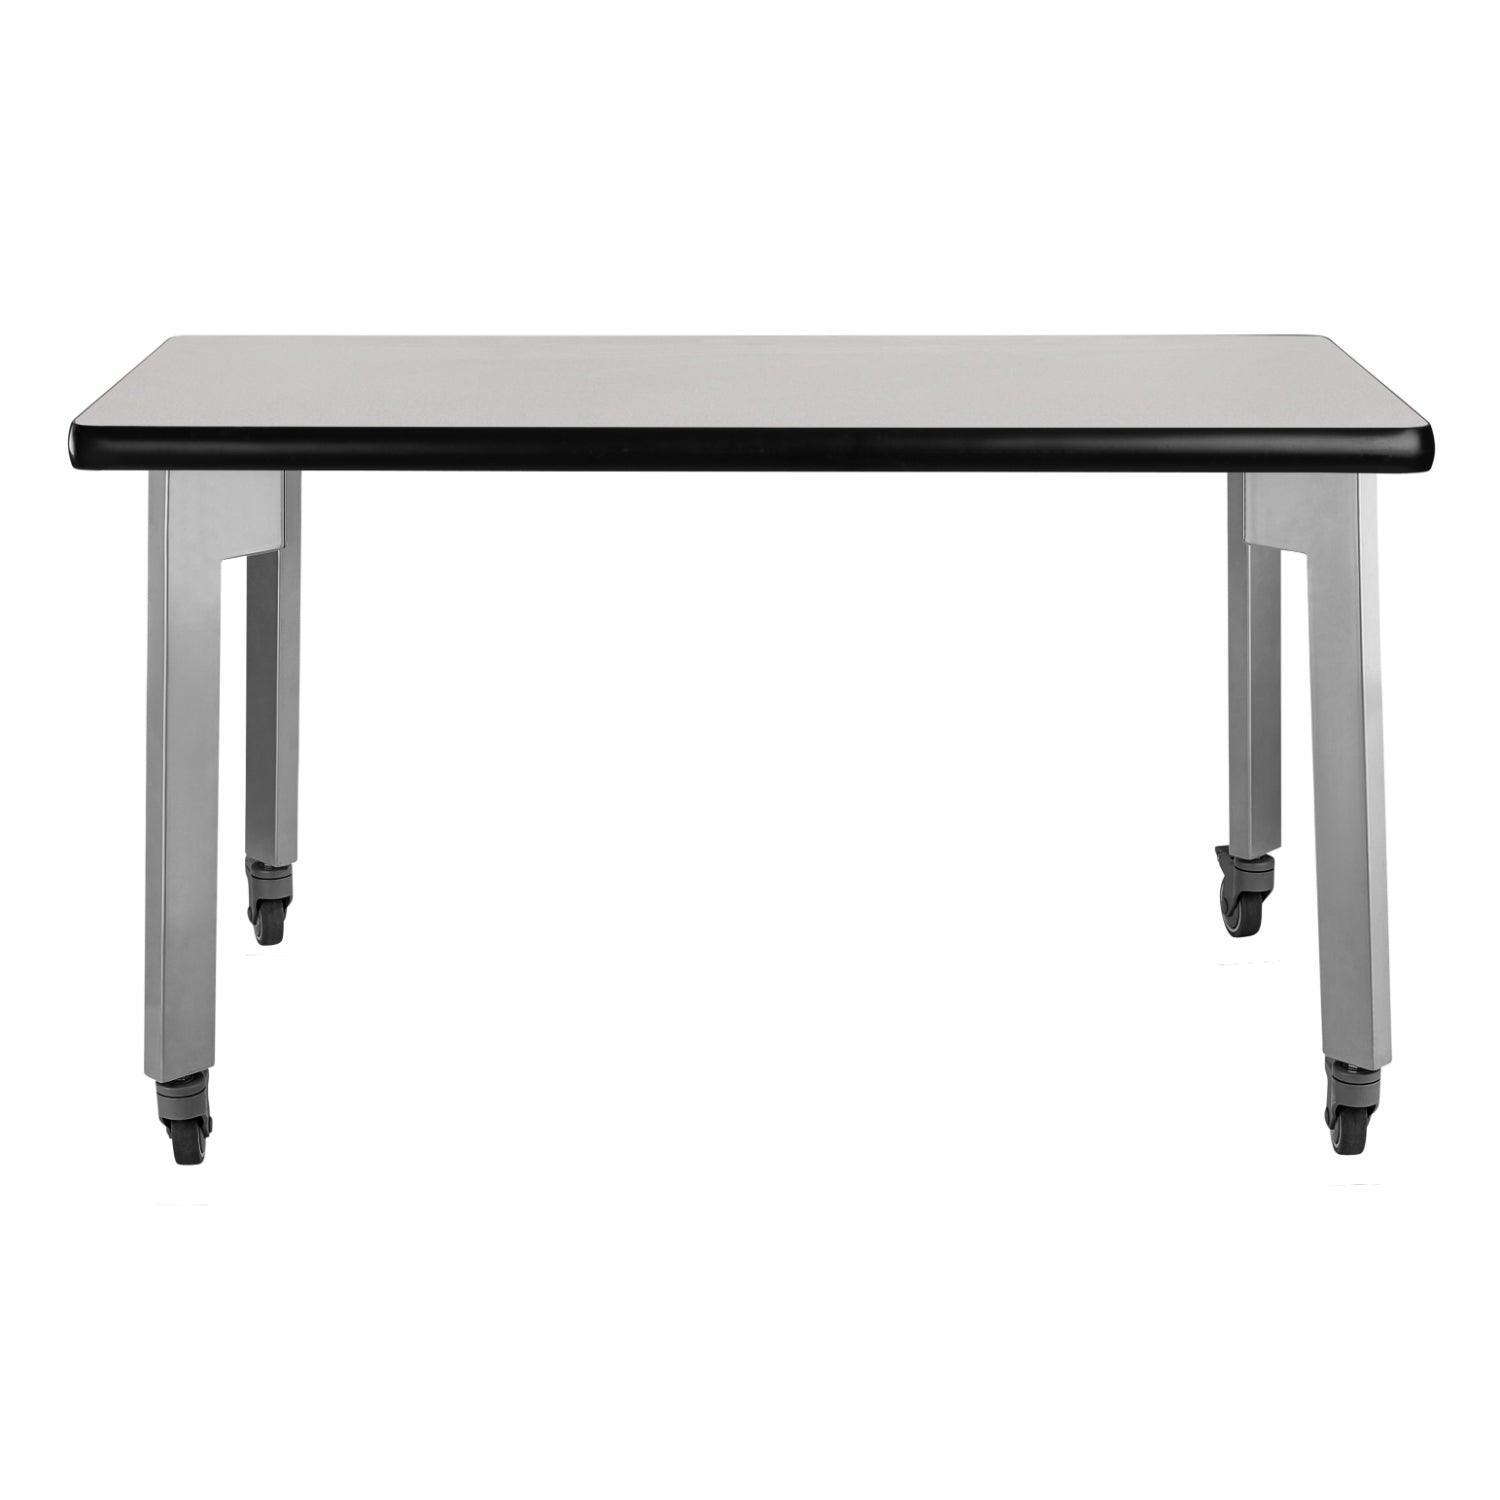 Titan Mobile Table, 30" x 42", Standard High Pressure Laminate Top with Particleboard Core and T-Mold Edge